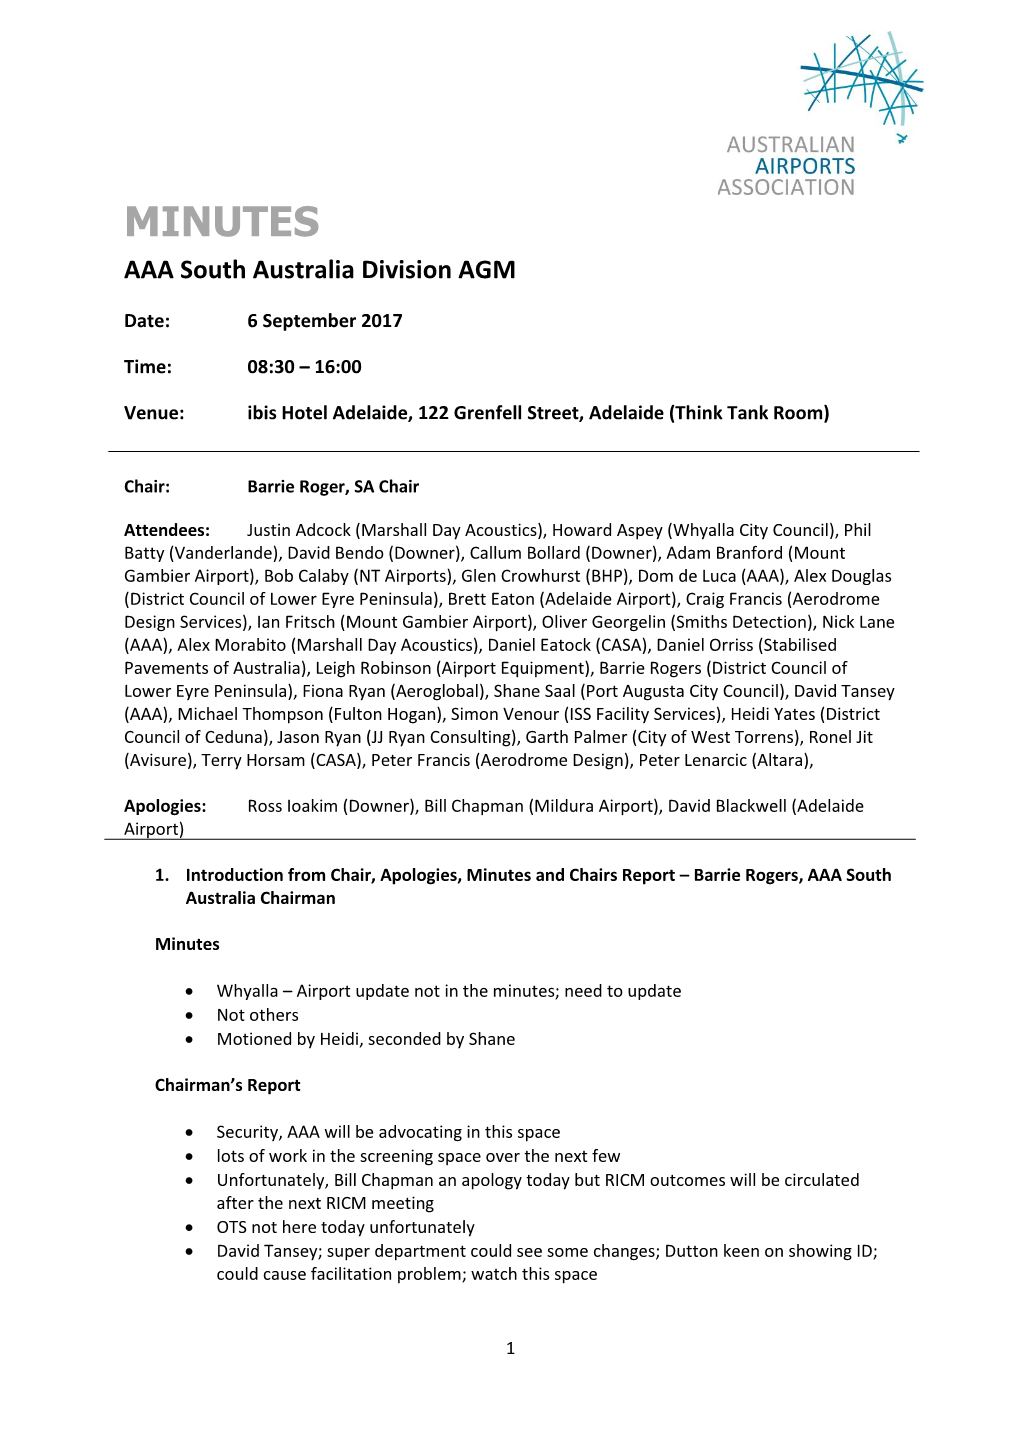 MINUTES AAA South Australia Division AGM